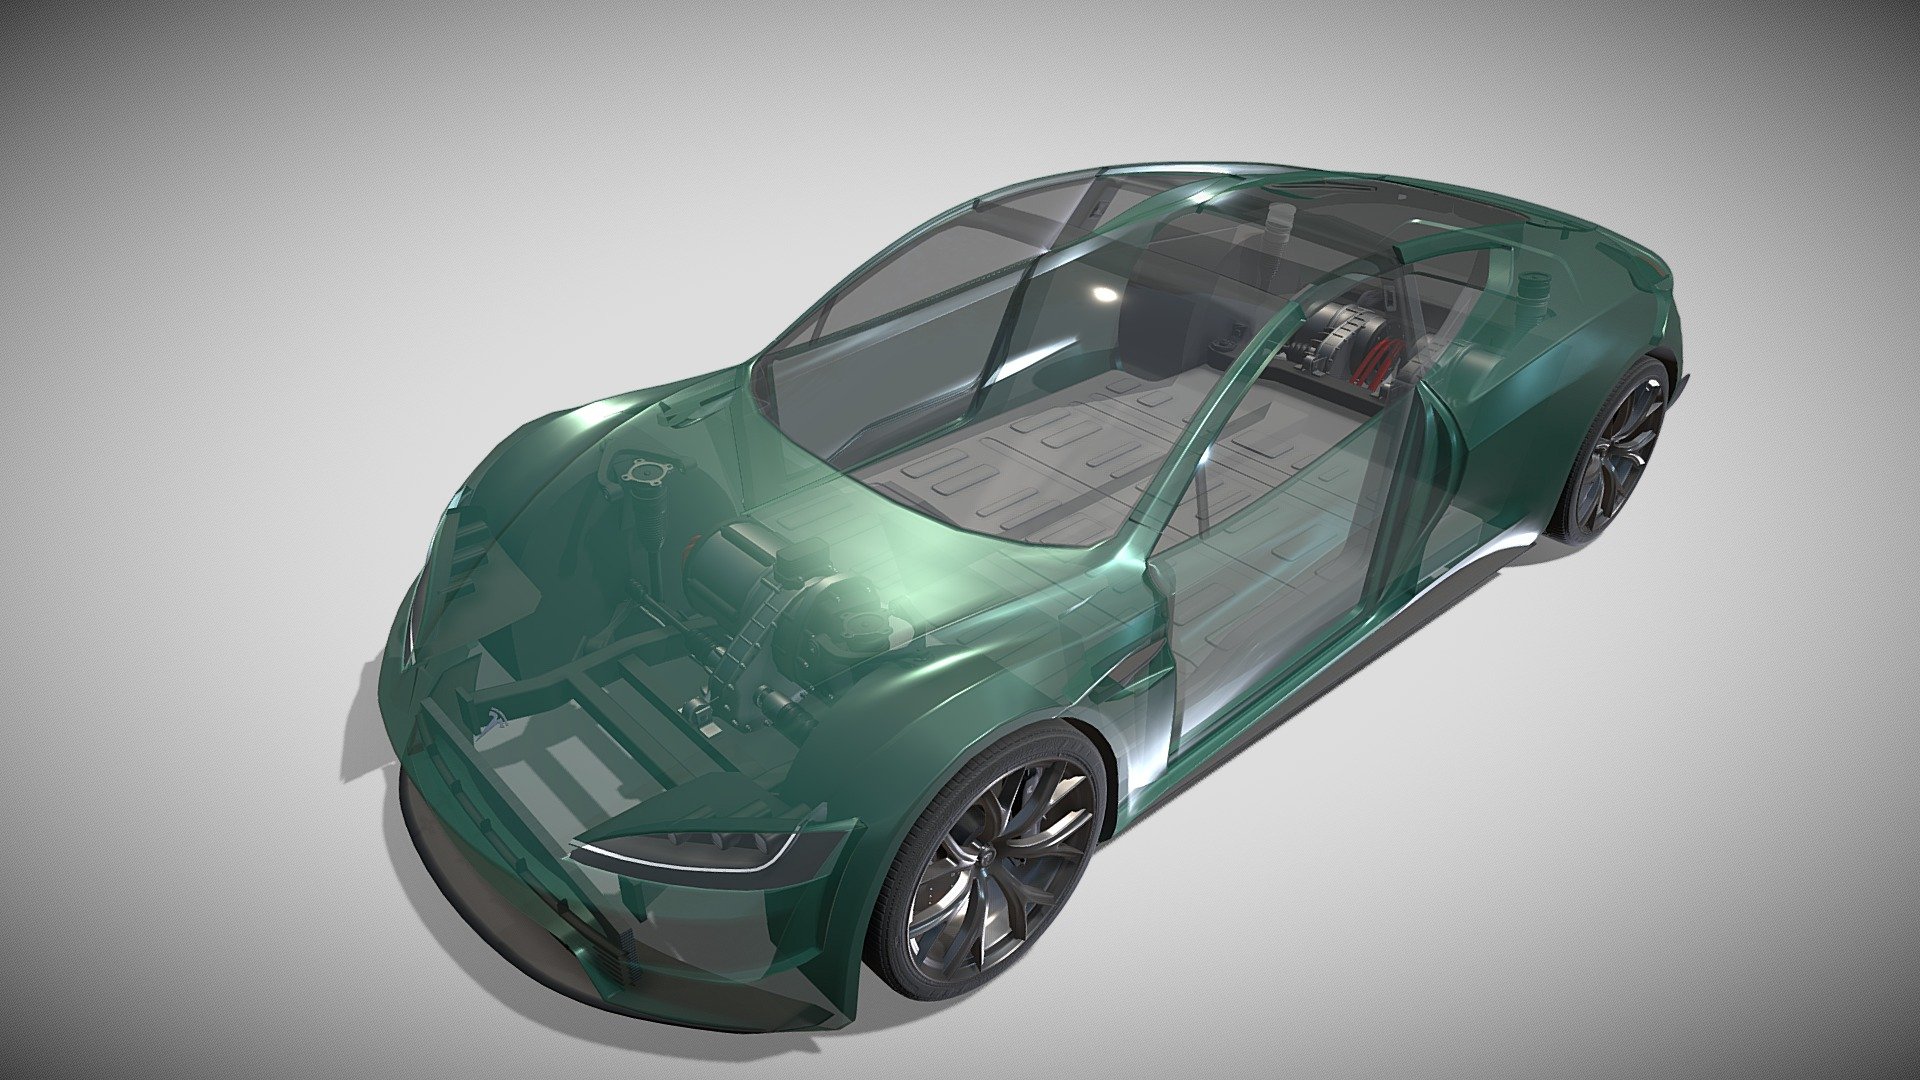 Tesla Roadster with full chassis (battery pack, 3 motor setup, brakes, linkages, suspension, steering) 3d model rendered with Cycles in Blender, as per seen on attached images.

File formats:
-.blend, rendered with cycles, as seen in the images;
-.blend, rendered with cycles, with a see-through of the chassis, as seen in the images;
-.obj, with materials applied;
-.dae, with materials applied;
-.fbx, with material slots applied;
-.stl;

Files come named appropriately and split by file format.

3D Software:
The 3D model was originally created in to Blender 2.79 and rendered with Cycles.

Materials and textures:
The models have materials applied in all formats, and are ready to import and render.
The models come with no image textures as everything is material based.

Preview scenes:
The preview images are rendered in Blender using its built-in render engine &lsquo;Cycles' 3d model